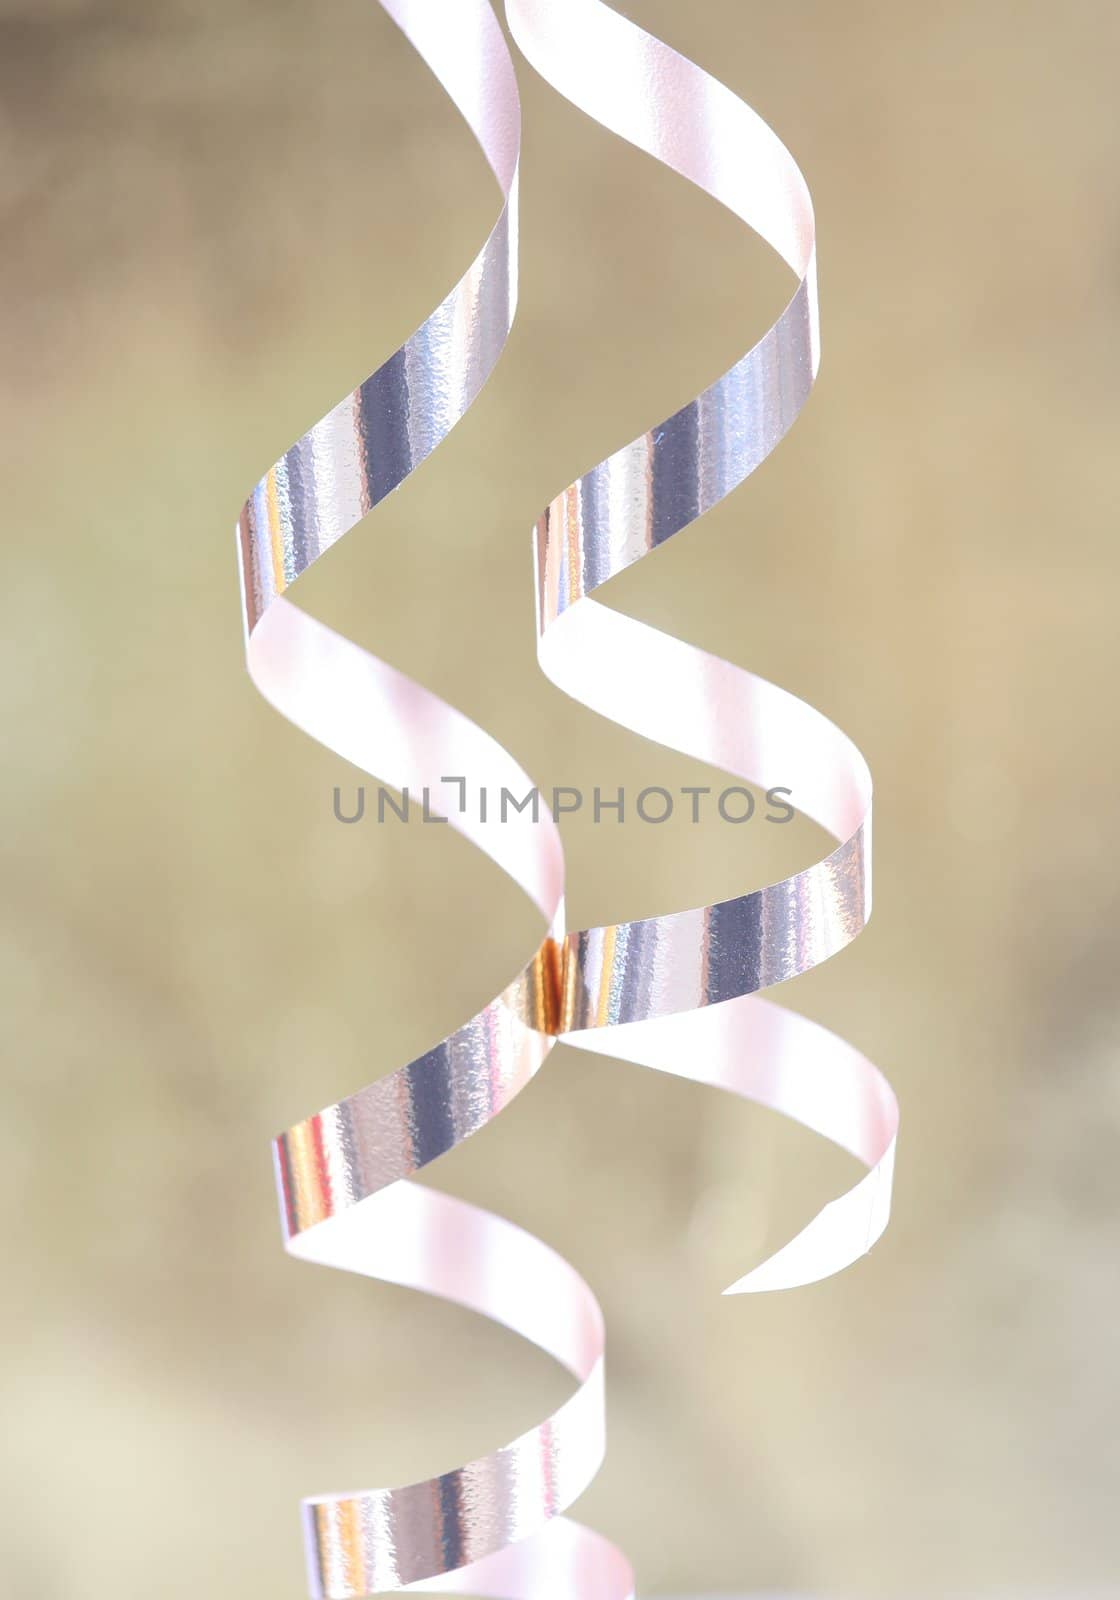 Gold satin ribbons curled elegantly, holiday party theme